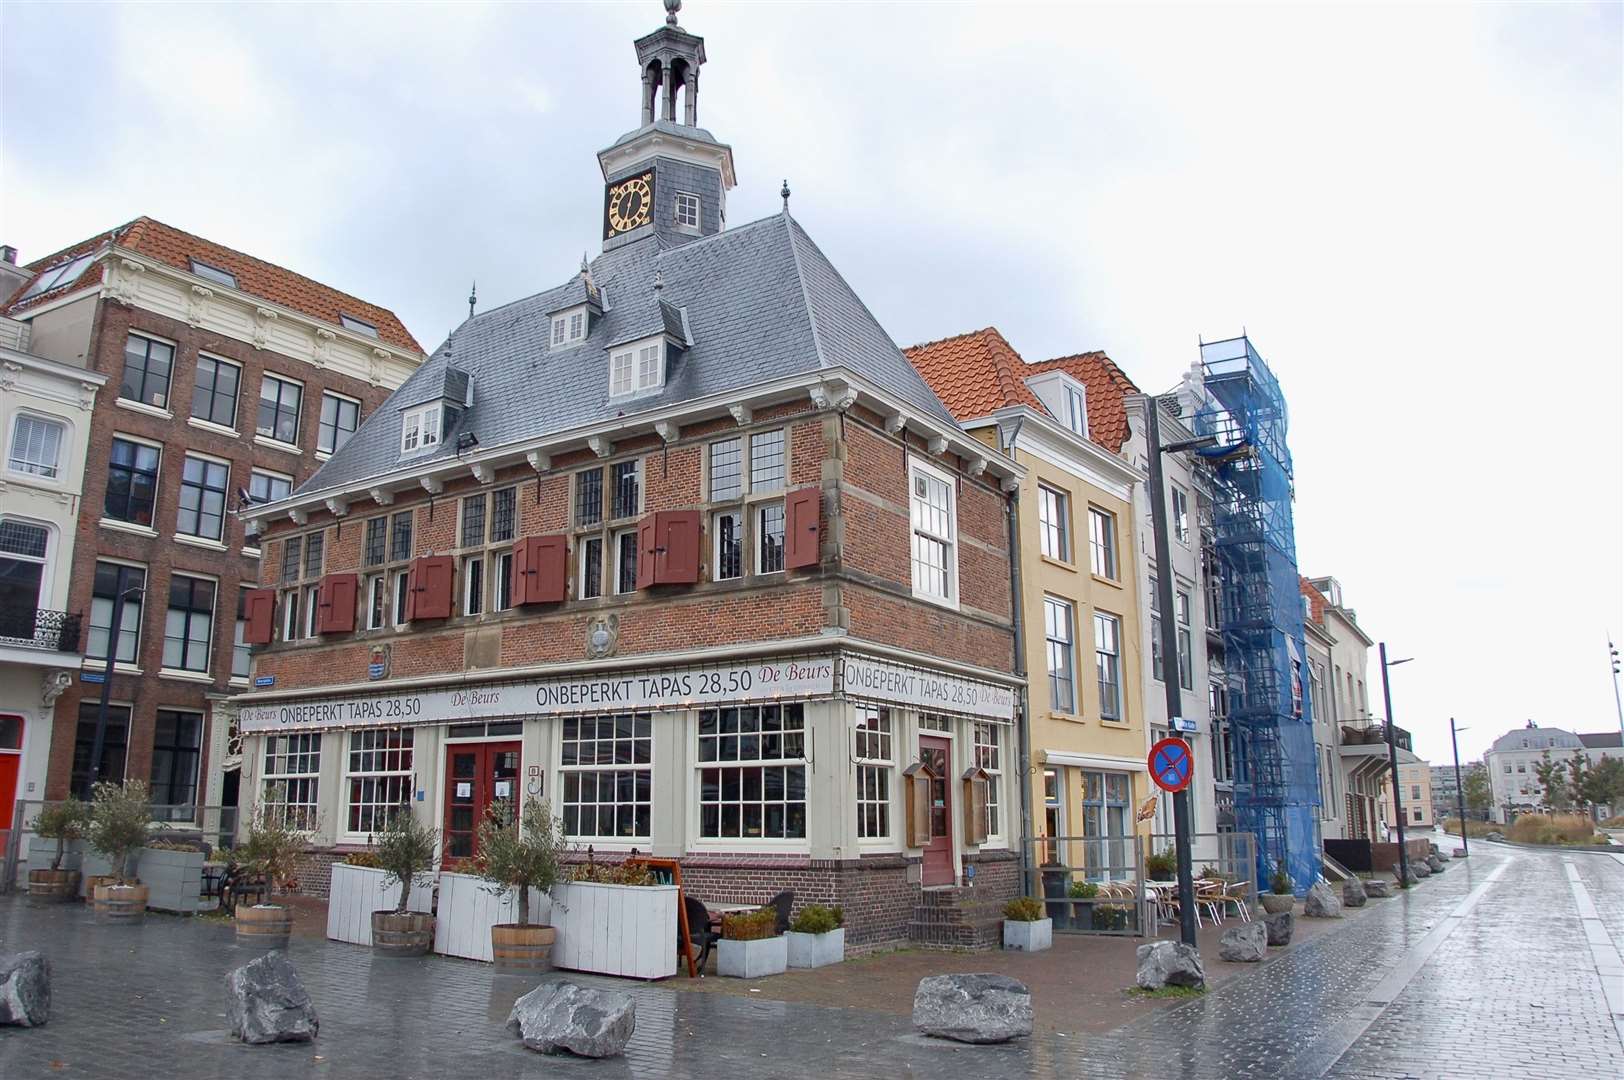 The old corn exchange, now a restaurant and the filled in dock at Vlissingen